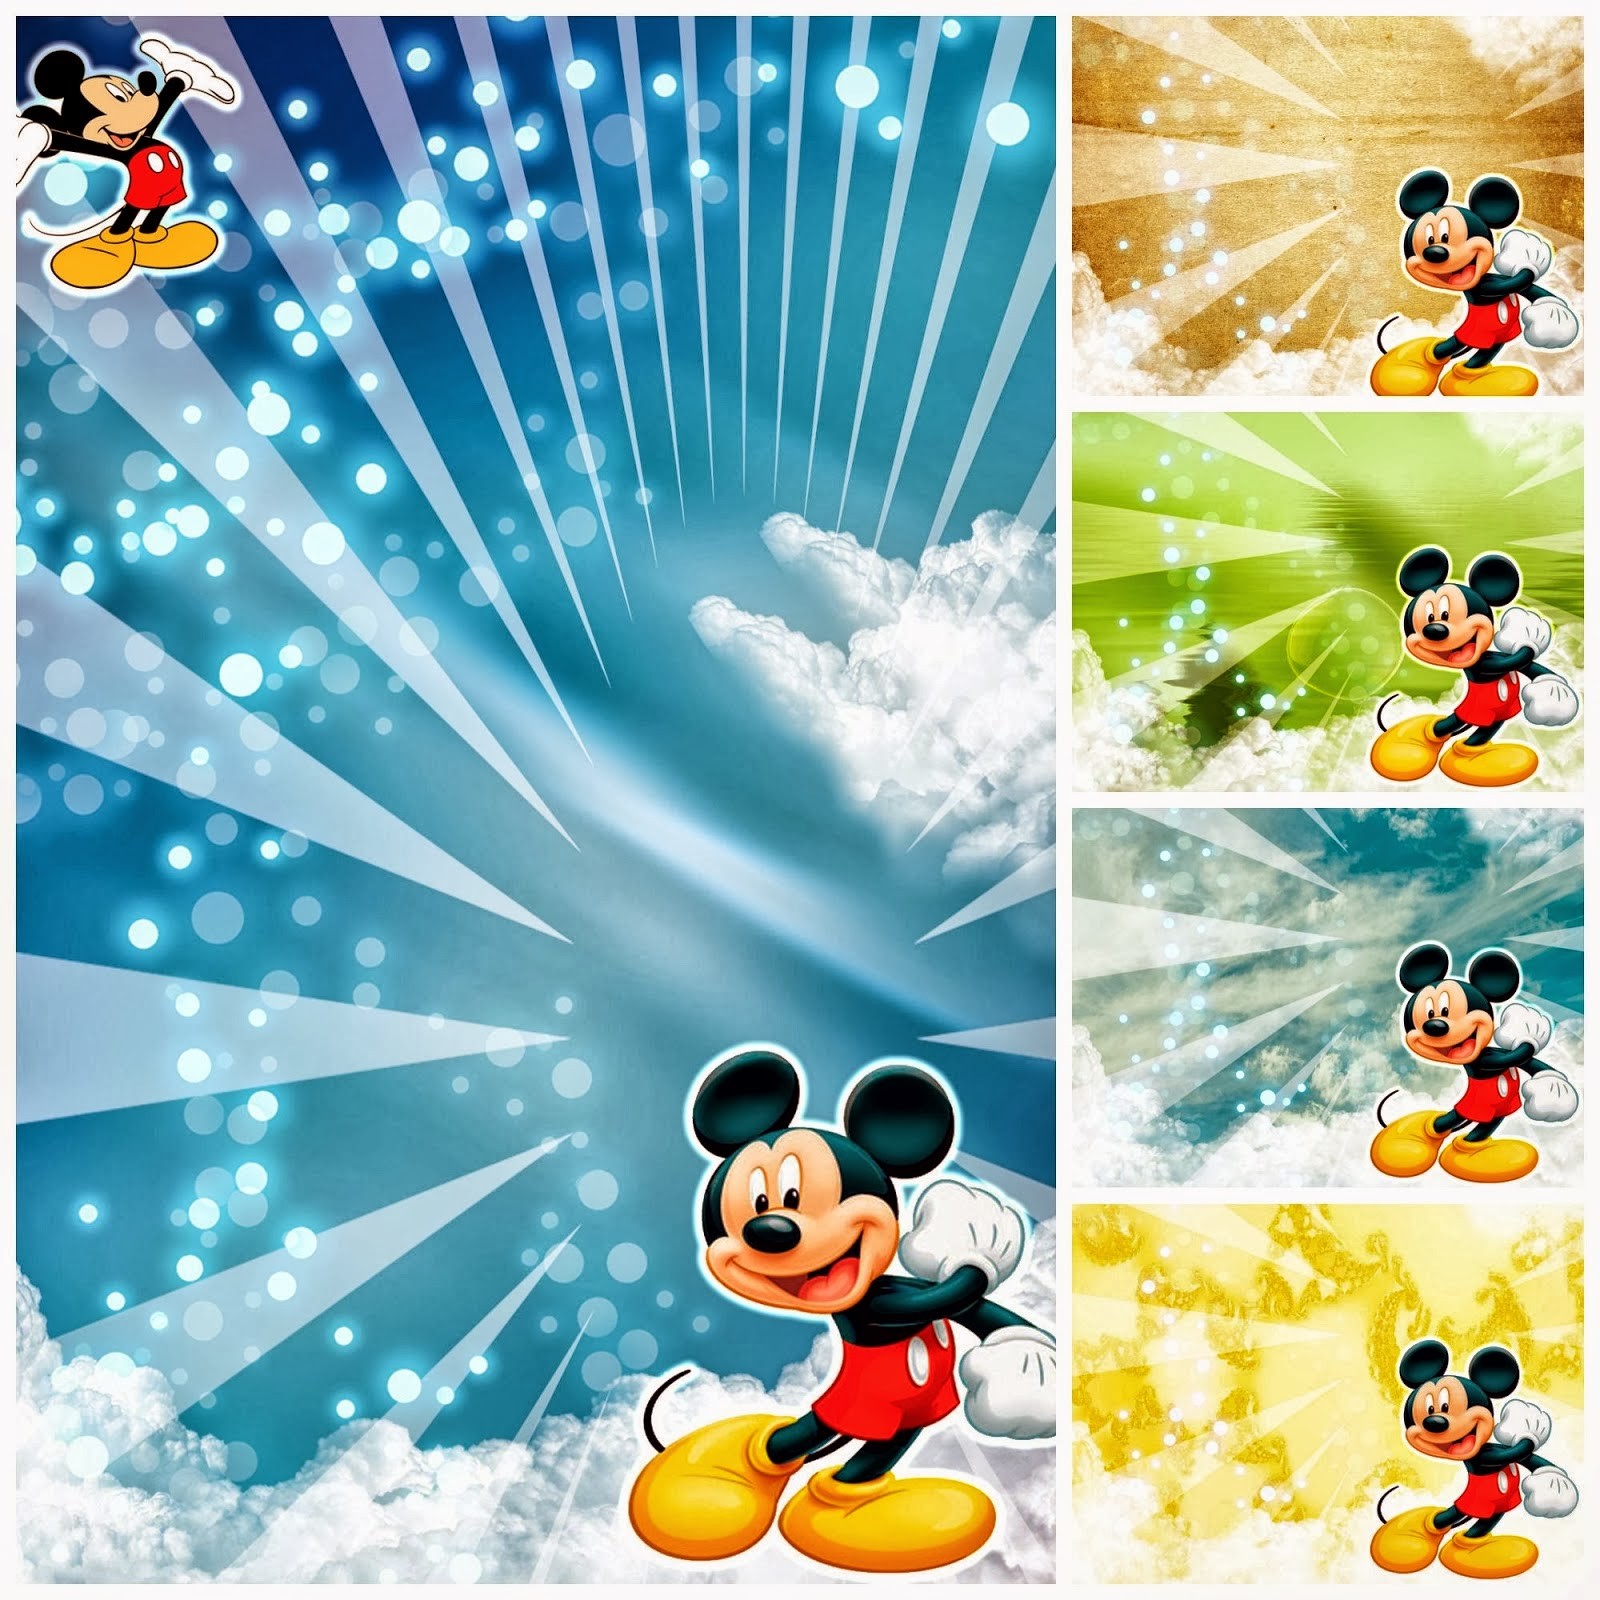 Handsome Mickey Mouse Wallpaper Hd Wallpapers Free - Baby Mickey Mouse  Birthday Background - 1600x1600 Wallpaper 